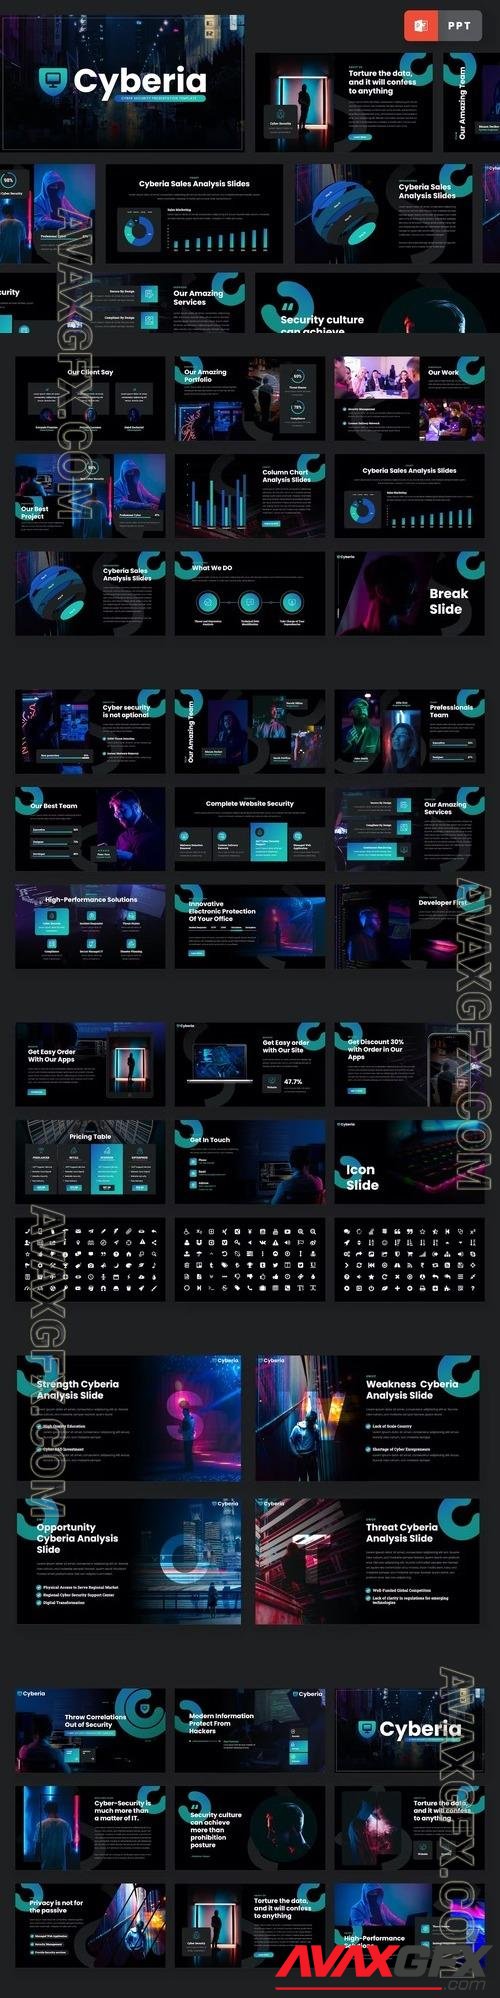 CYBERIA - Cyber Security Powerpoint Template